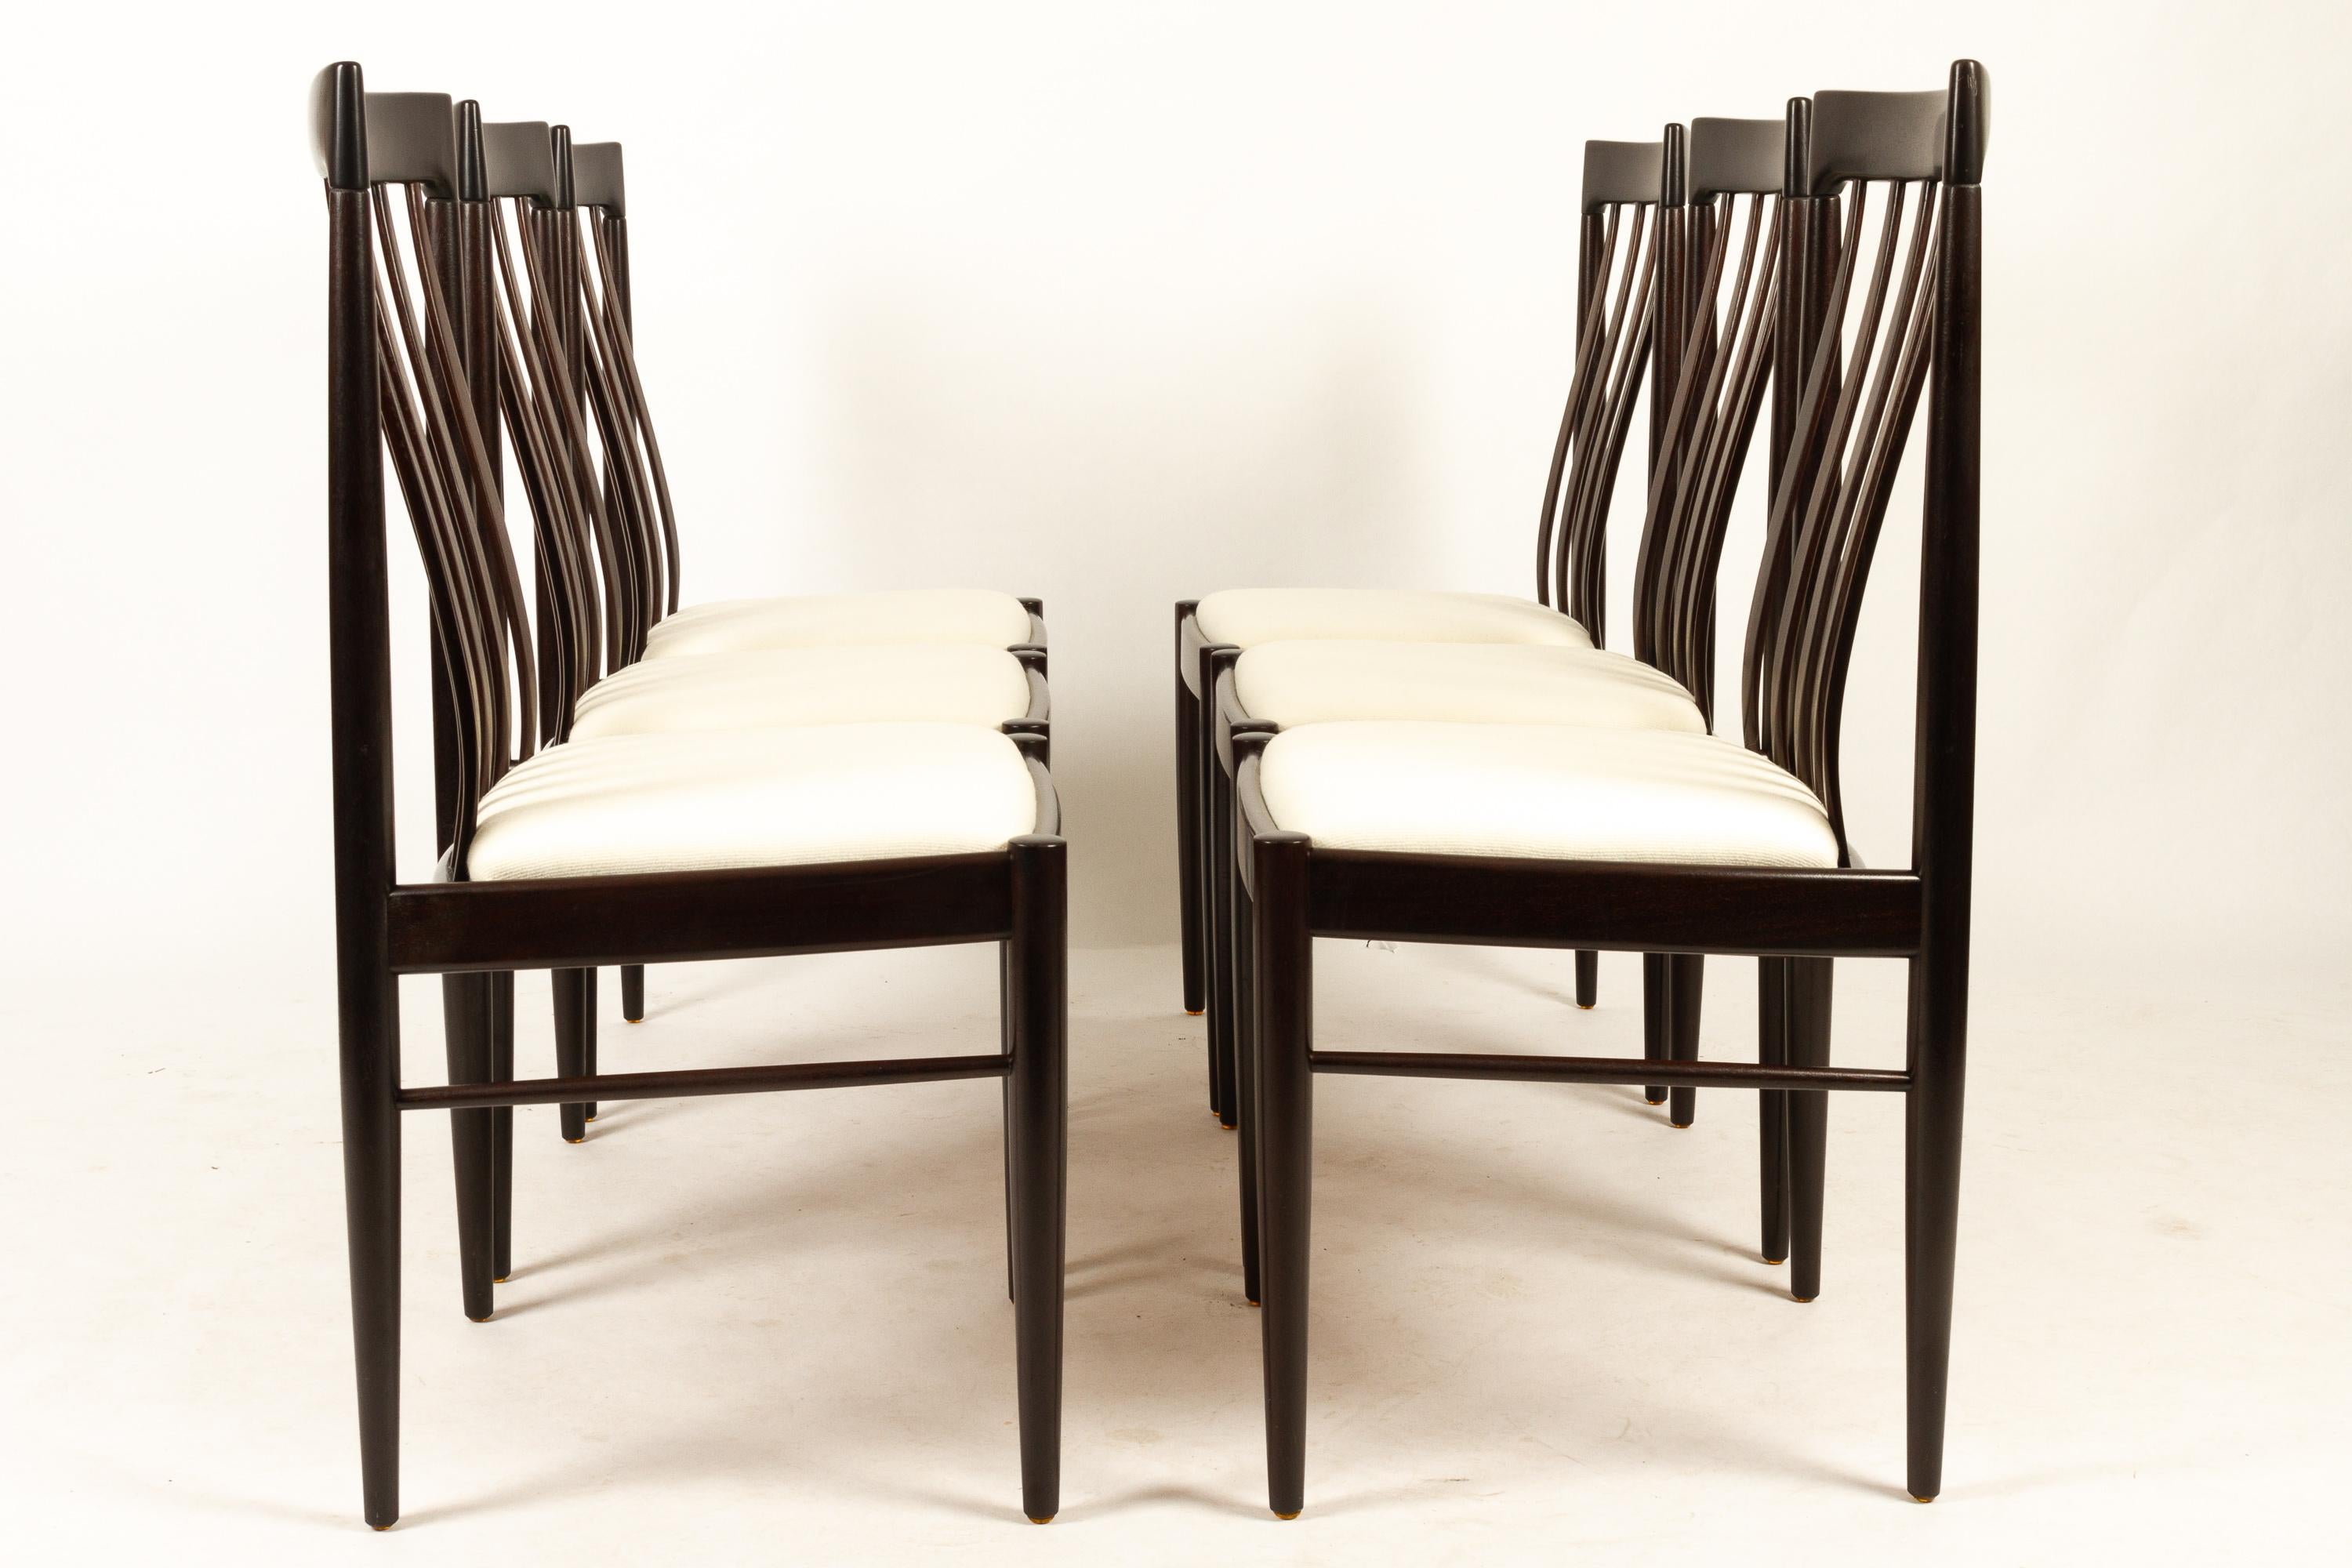 Danish mahogany dining chairs by H. W. Klein for Bramin 1970s set of 6.
Set of six elegant dining chairs in solid stained mahogany. High back with thin curved bars. Seat is reupholstered in eggshell colored wool, with high density foam for extra